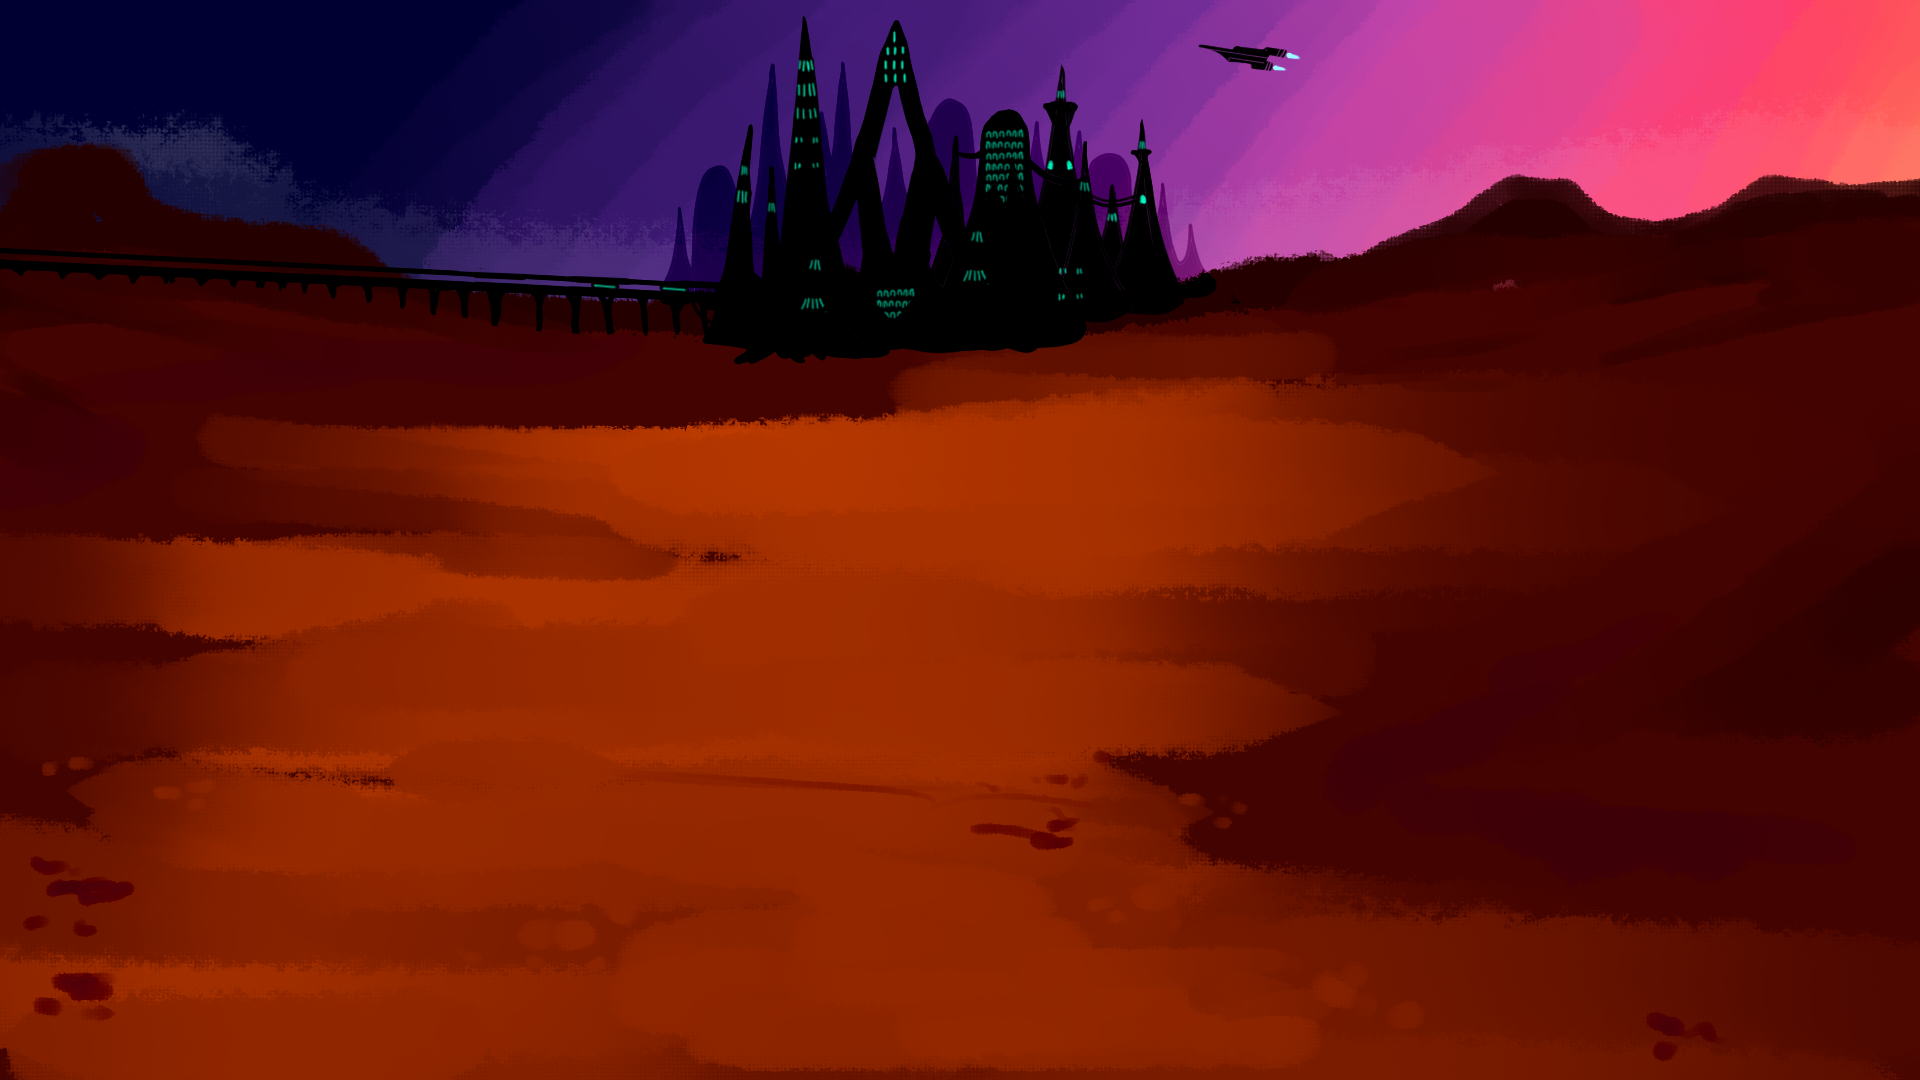 A cityscape of a New Xorryan city featuring the tall black spire buildings with cyan-lit windows, a small spacecraft used for interplanetary travel, and a tram system driving off into the horizon. The landscape is made up of dusty red sand dunes, with a few red rock mountains in the background.